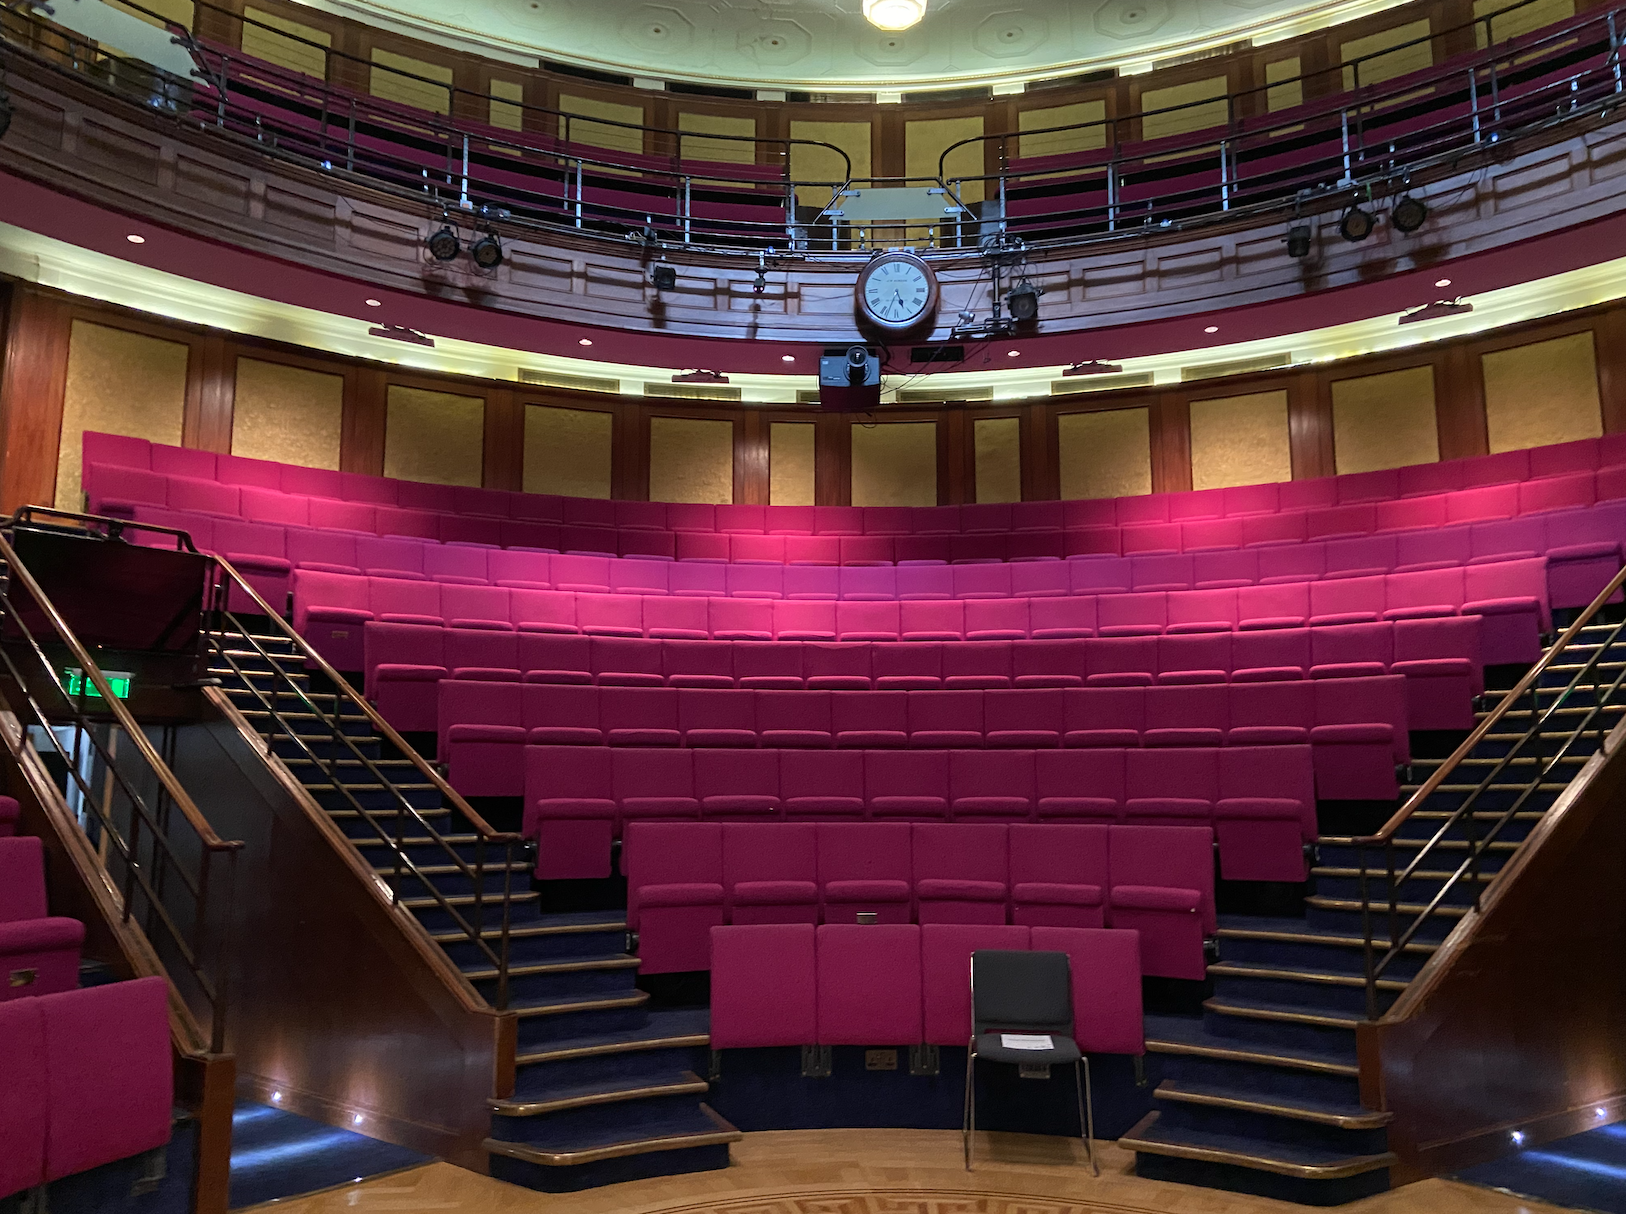 A front view of a lecture hall with red seats, a clock in the middle, a balcony and 2 sets of stairs